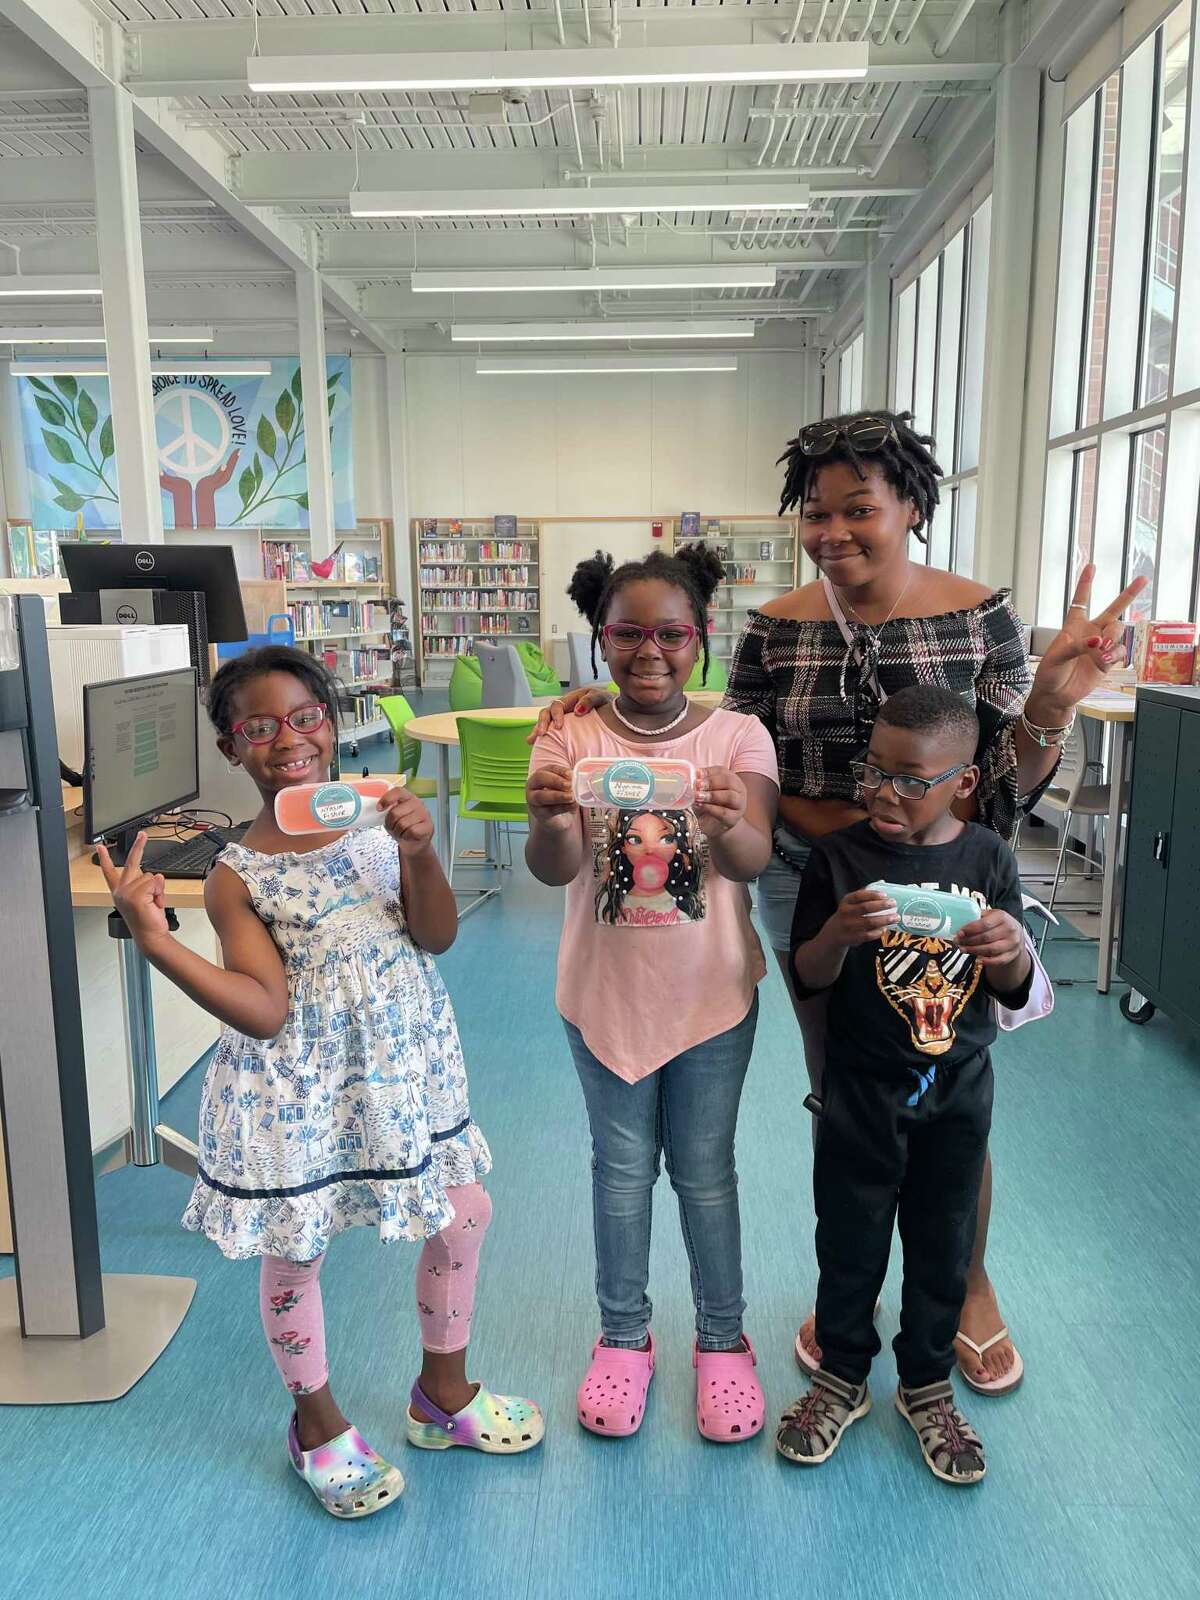 Destiny Horne of Hartford with her nieces, Nyeima and NyAsia Fisher, and nephew Devon Fisher after they received new eyeglasses at the Park Street Library at the Lyric last month through a partnership between Hartford Public Library and Vision to Learn.